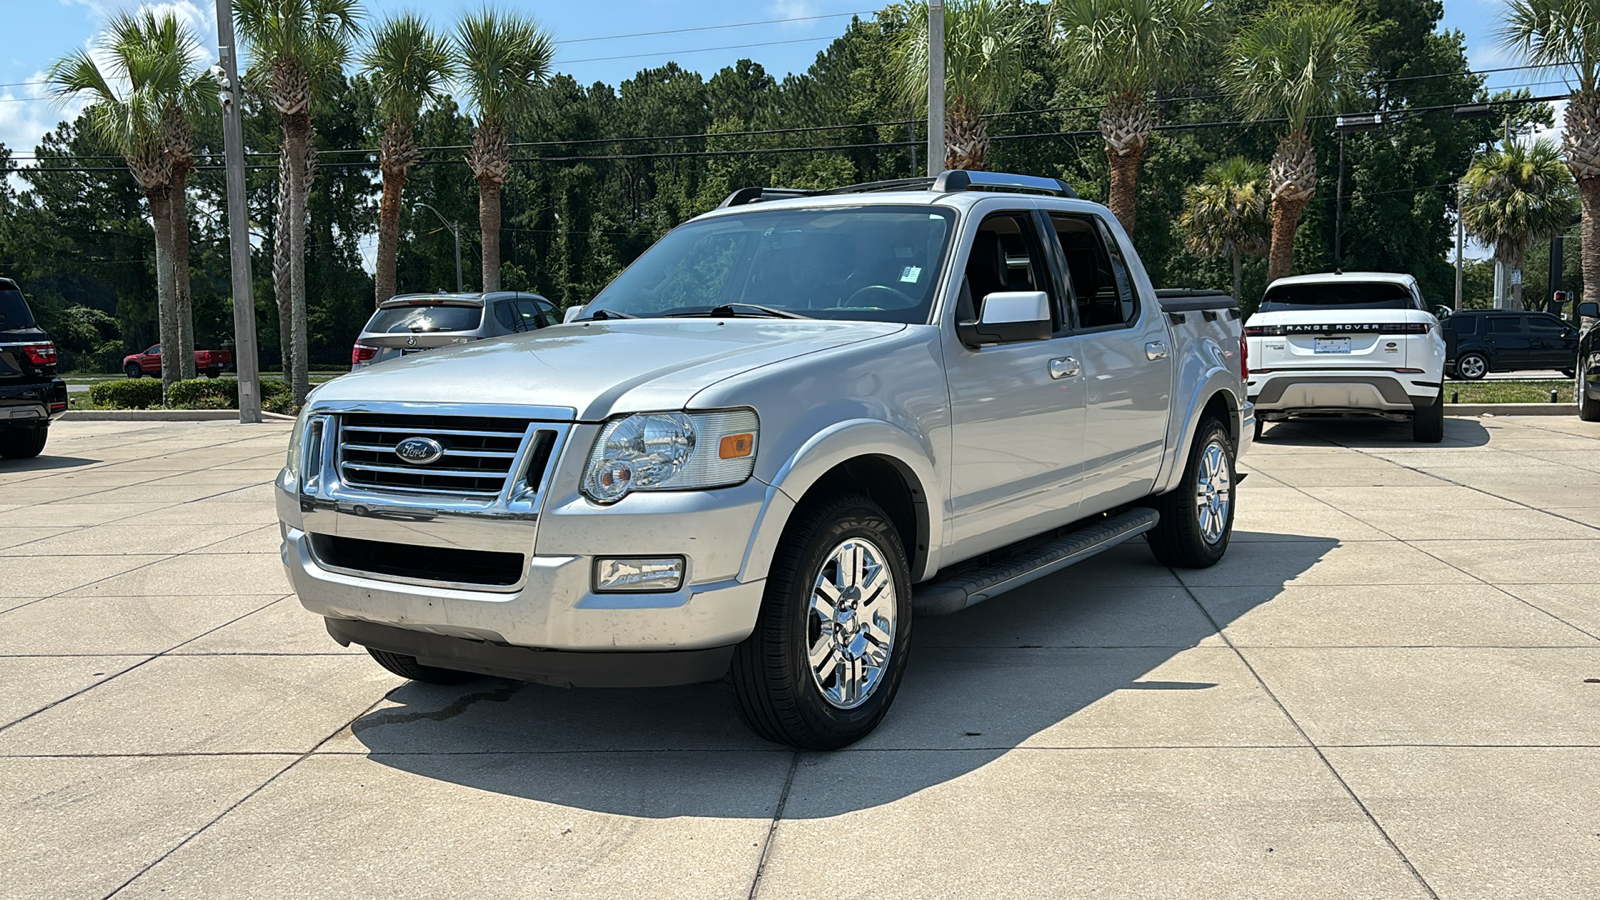 2010 Ford Explorer Sport Trac Limited 5